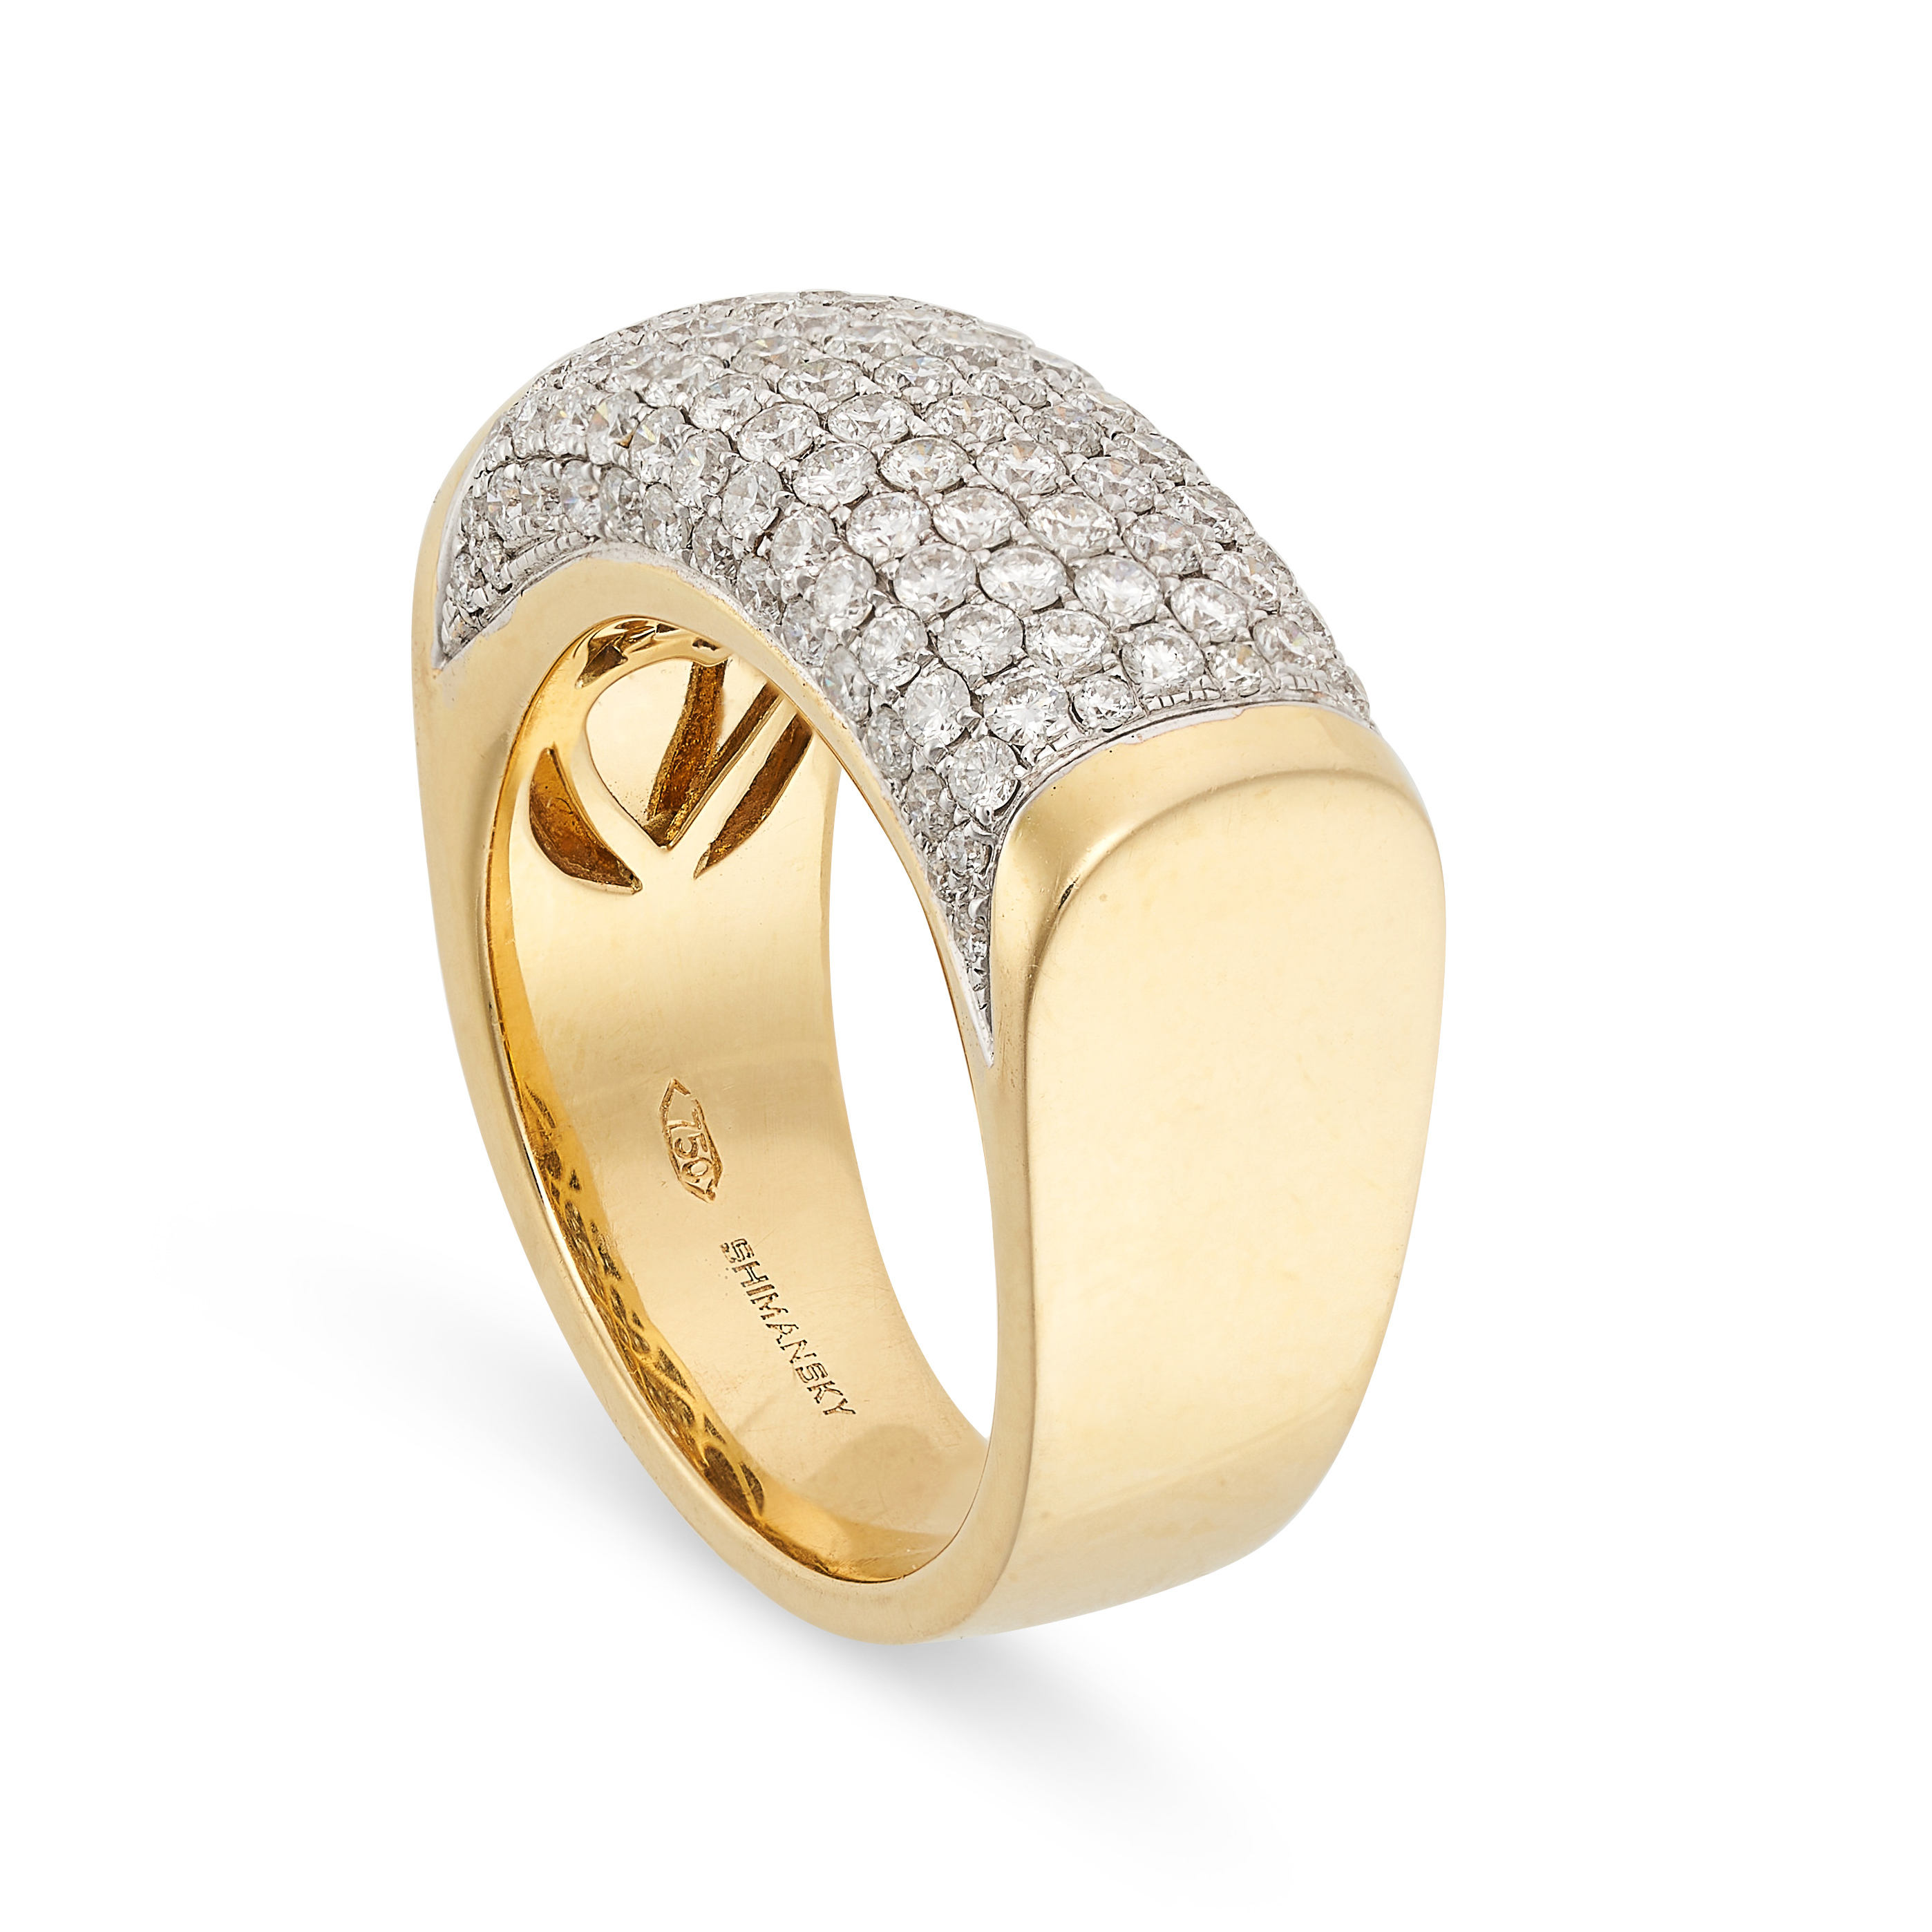 SHIMANSKY, A DIAMOND RING in 18ct yellow gold, pave set with nine rows ...